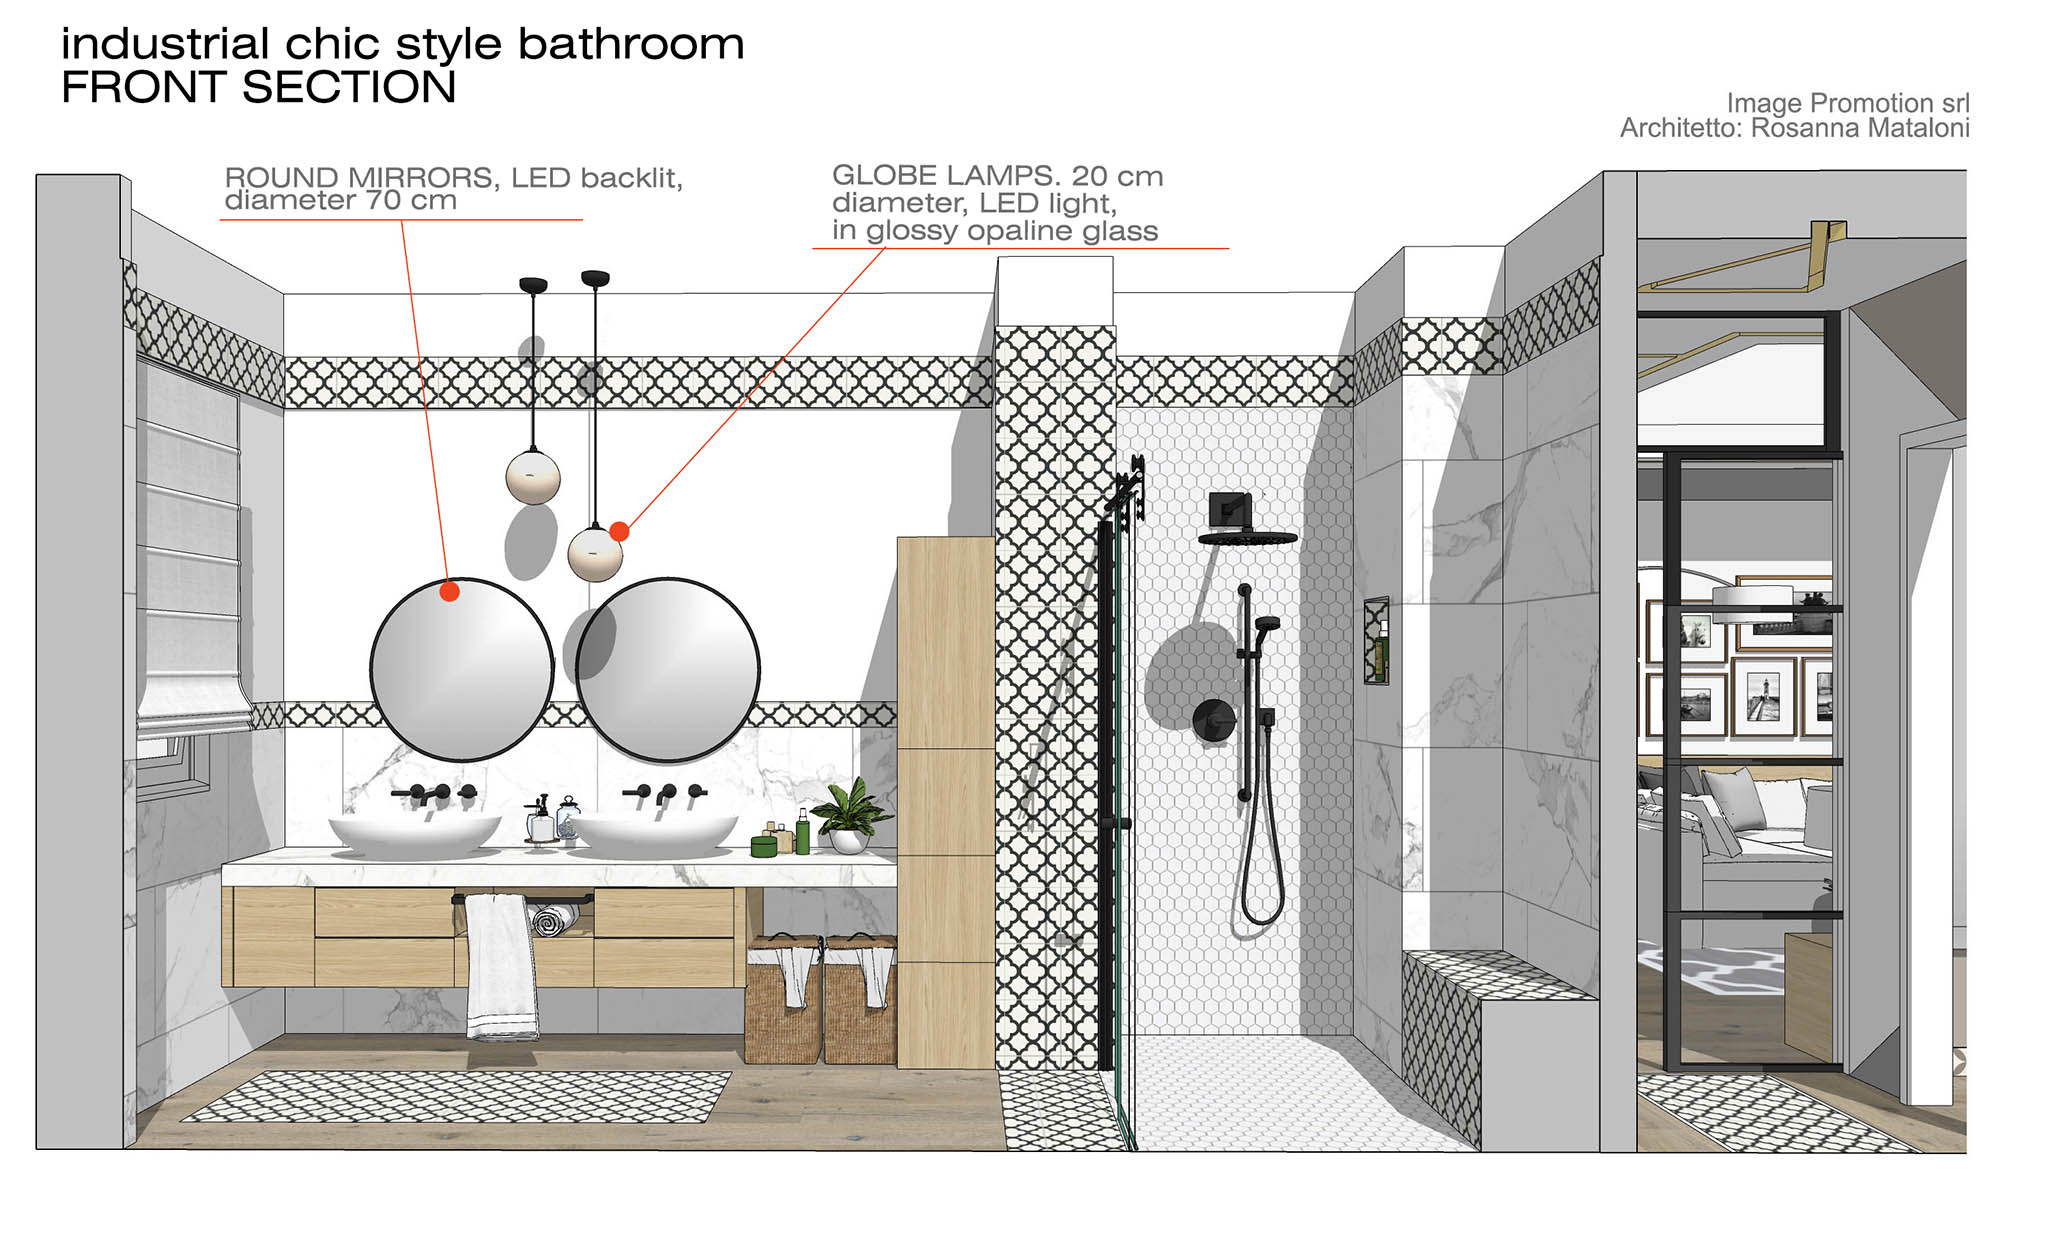 industrial chic style bathroom - FRONT SECTION